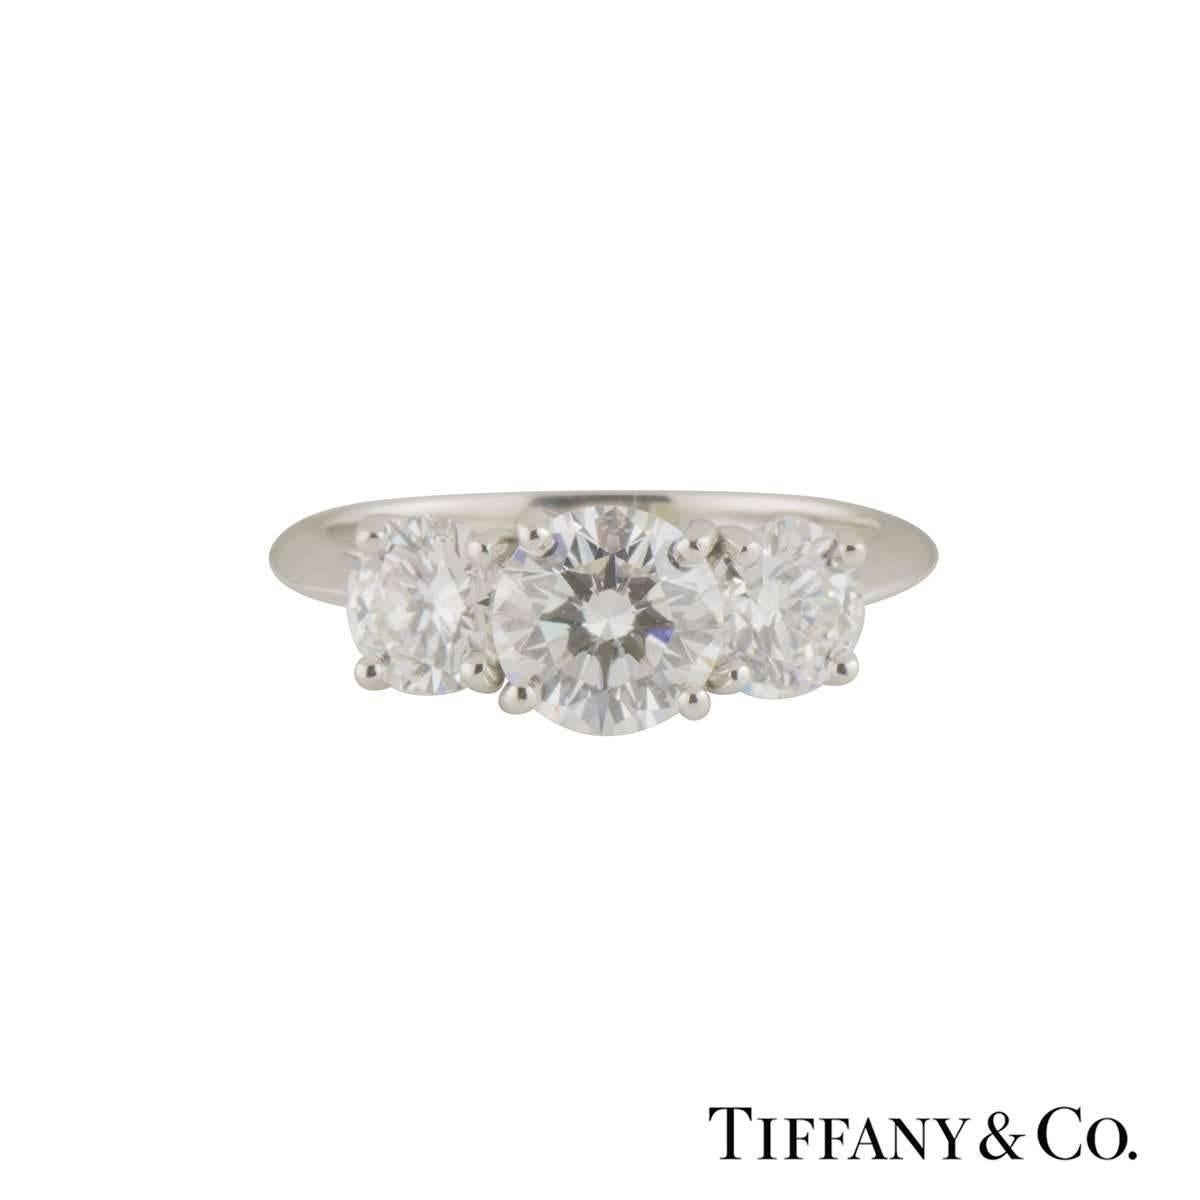 A stunning platinum Tiffany & Co. diamond trilogy ring. The ring comprises of a 1.26ct round brilliant cut diamond in a 4 claw setting, G colour, VS2 clarity. Complementing the central stone are 2 round brilliant cut diamonds set to each side.